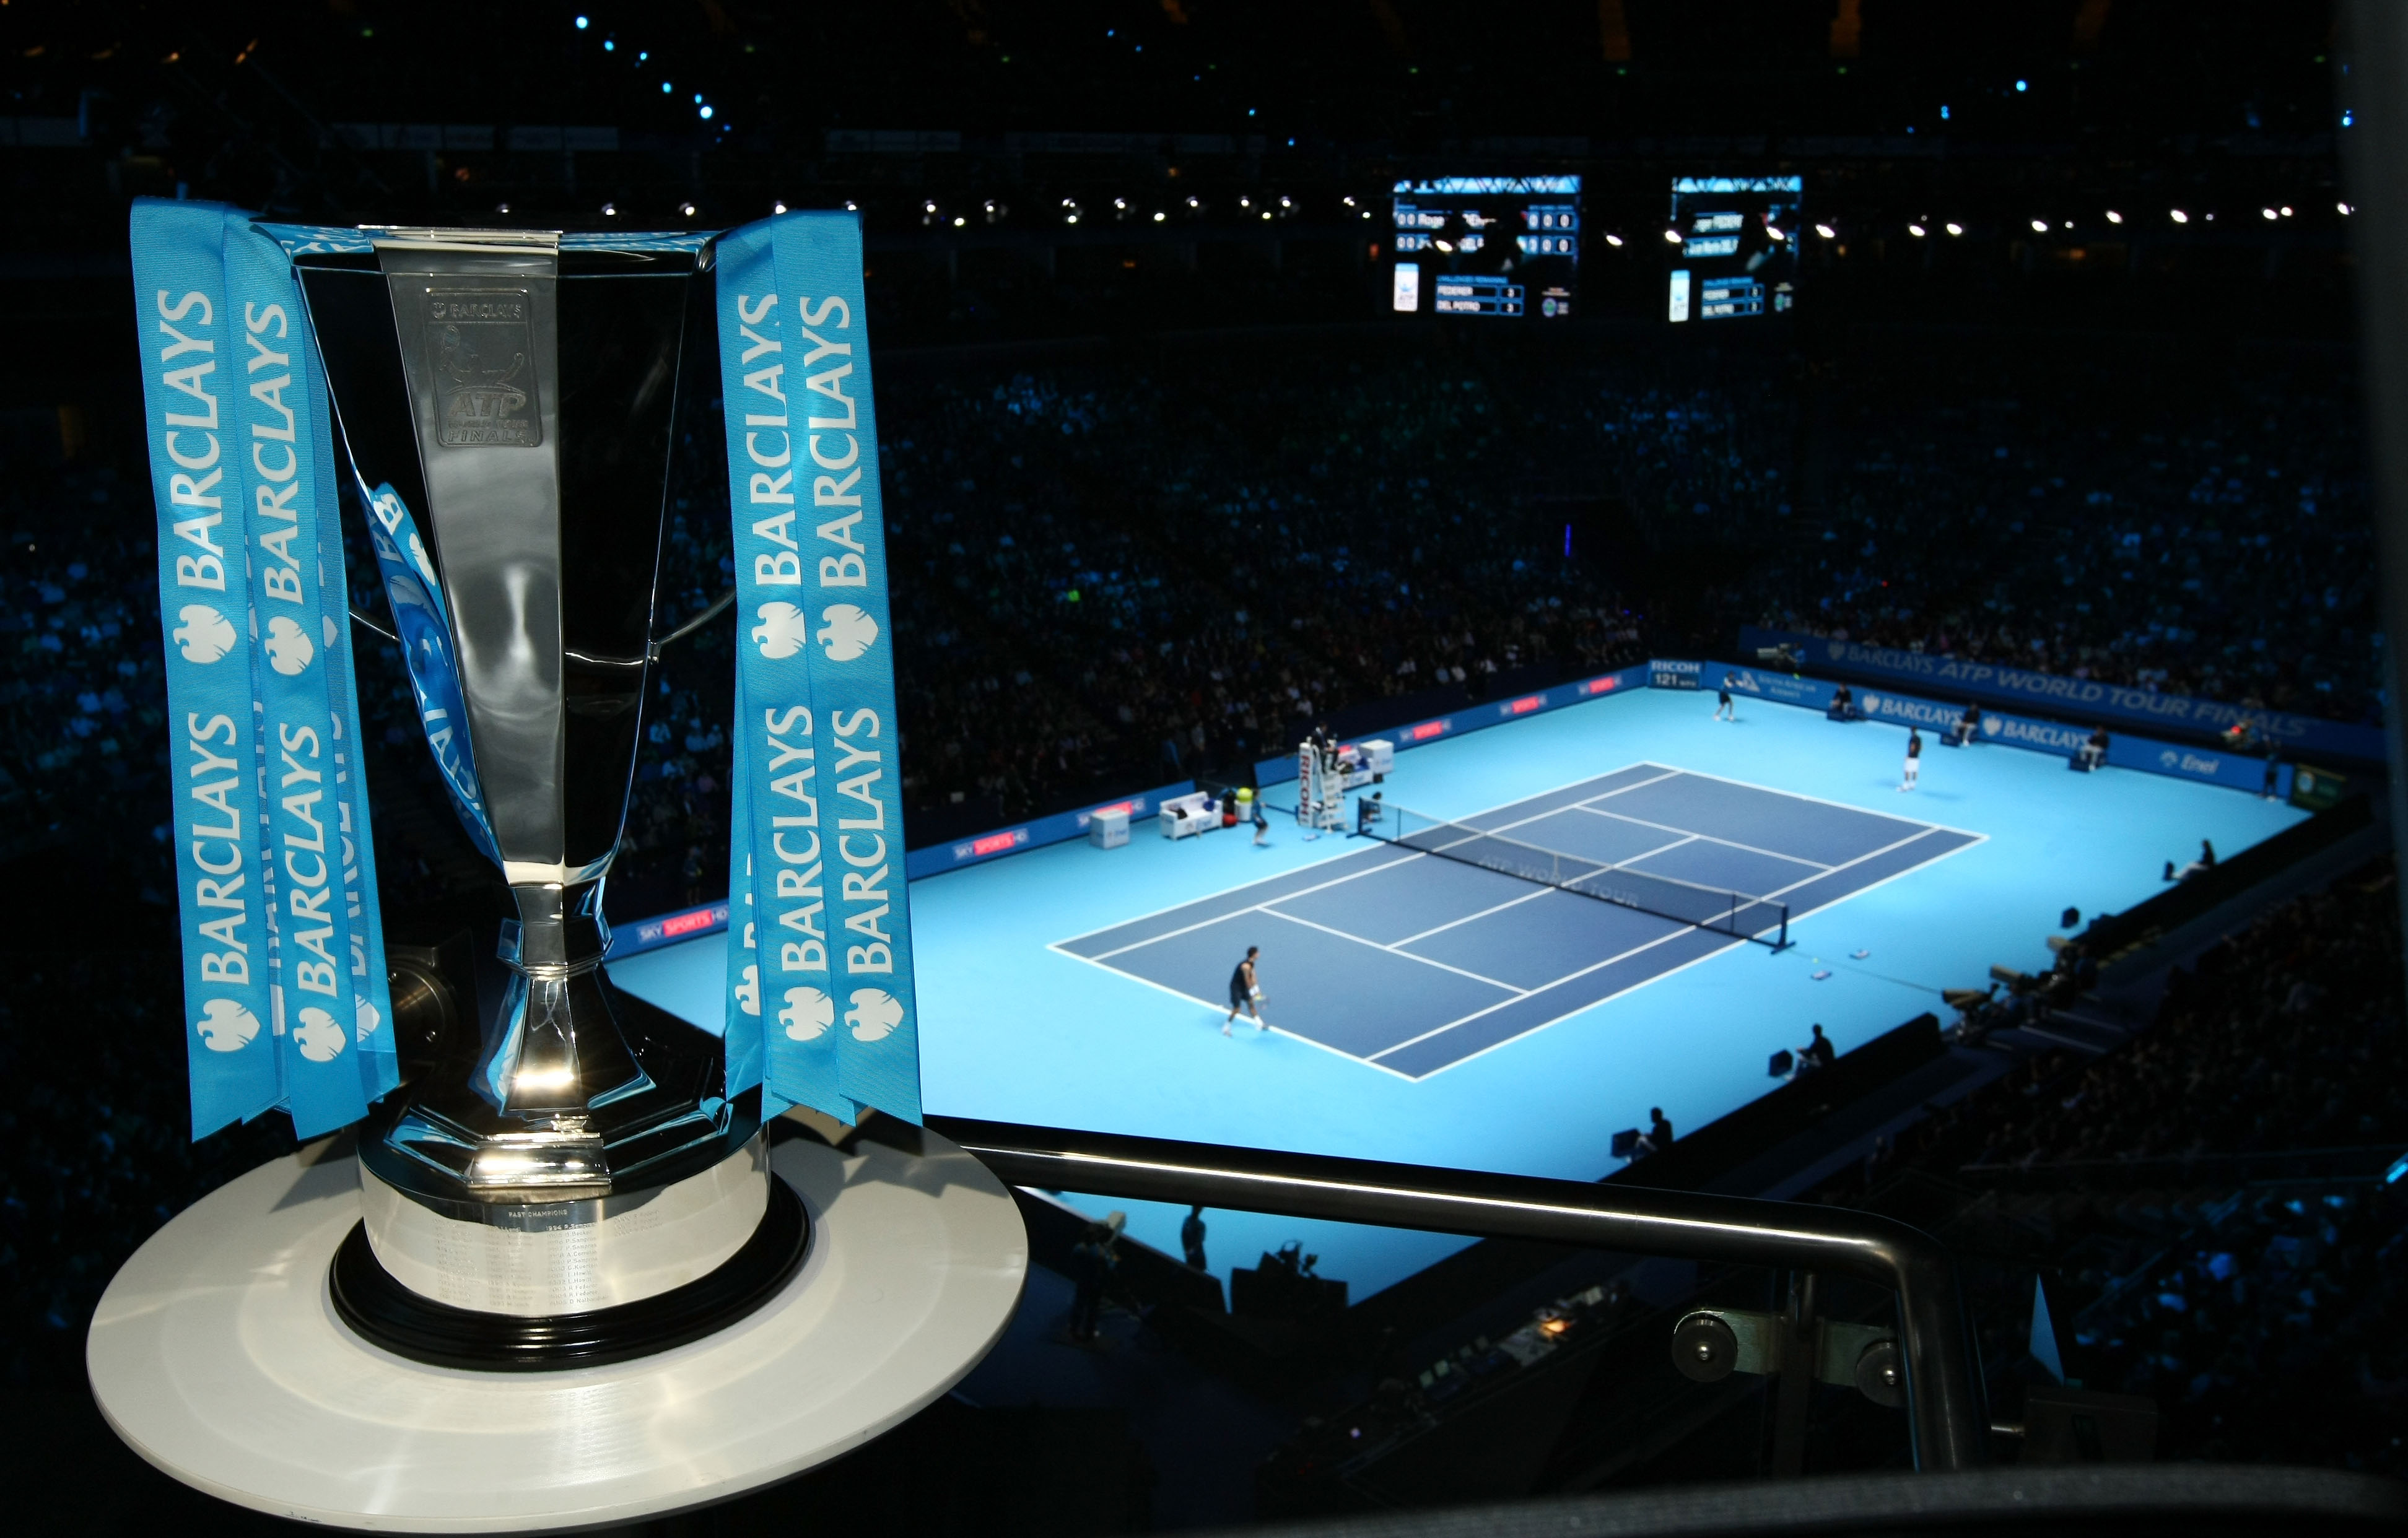 ATP World Tour Final 2013 in London